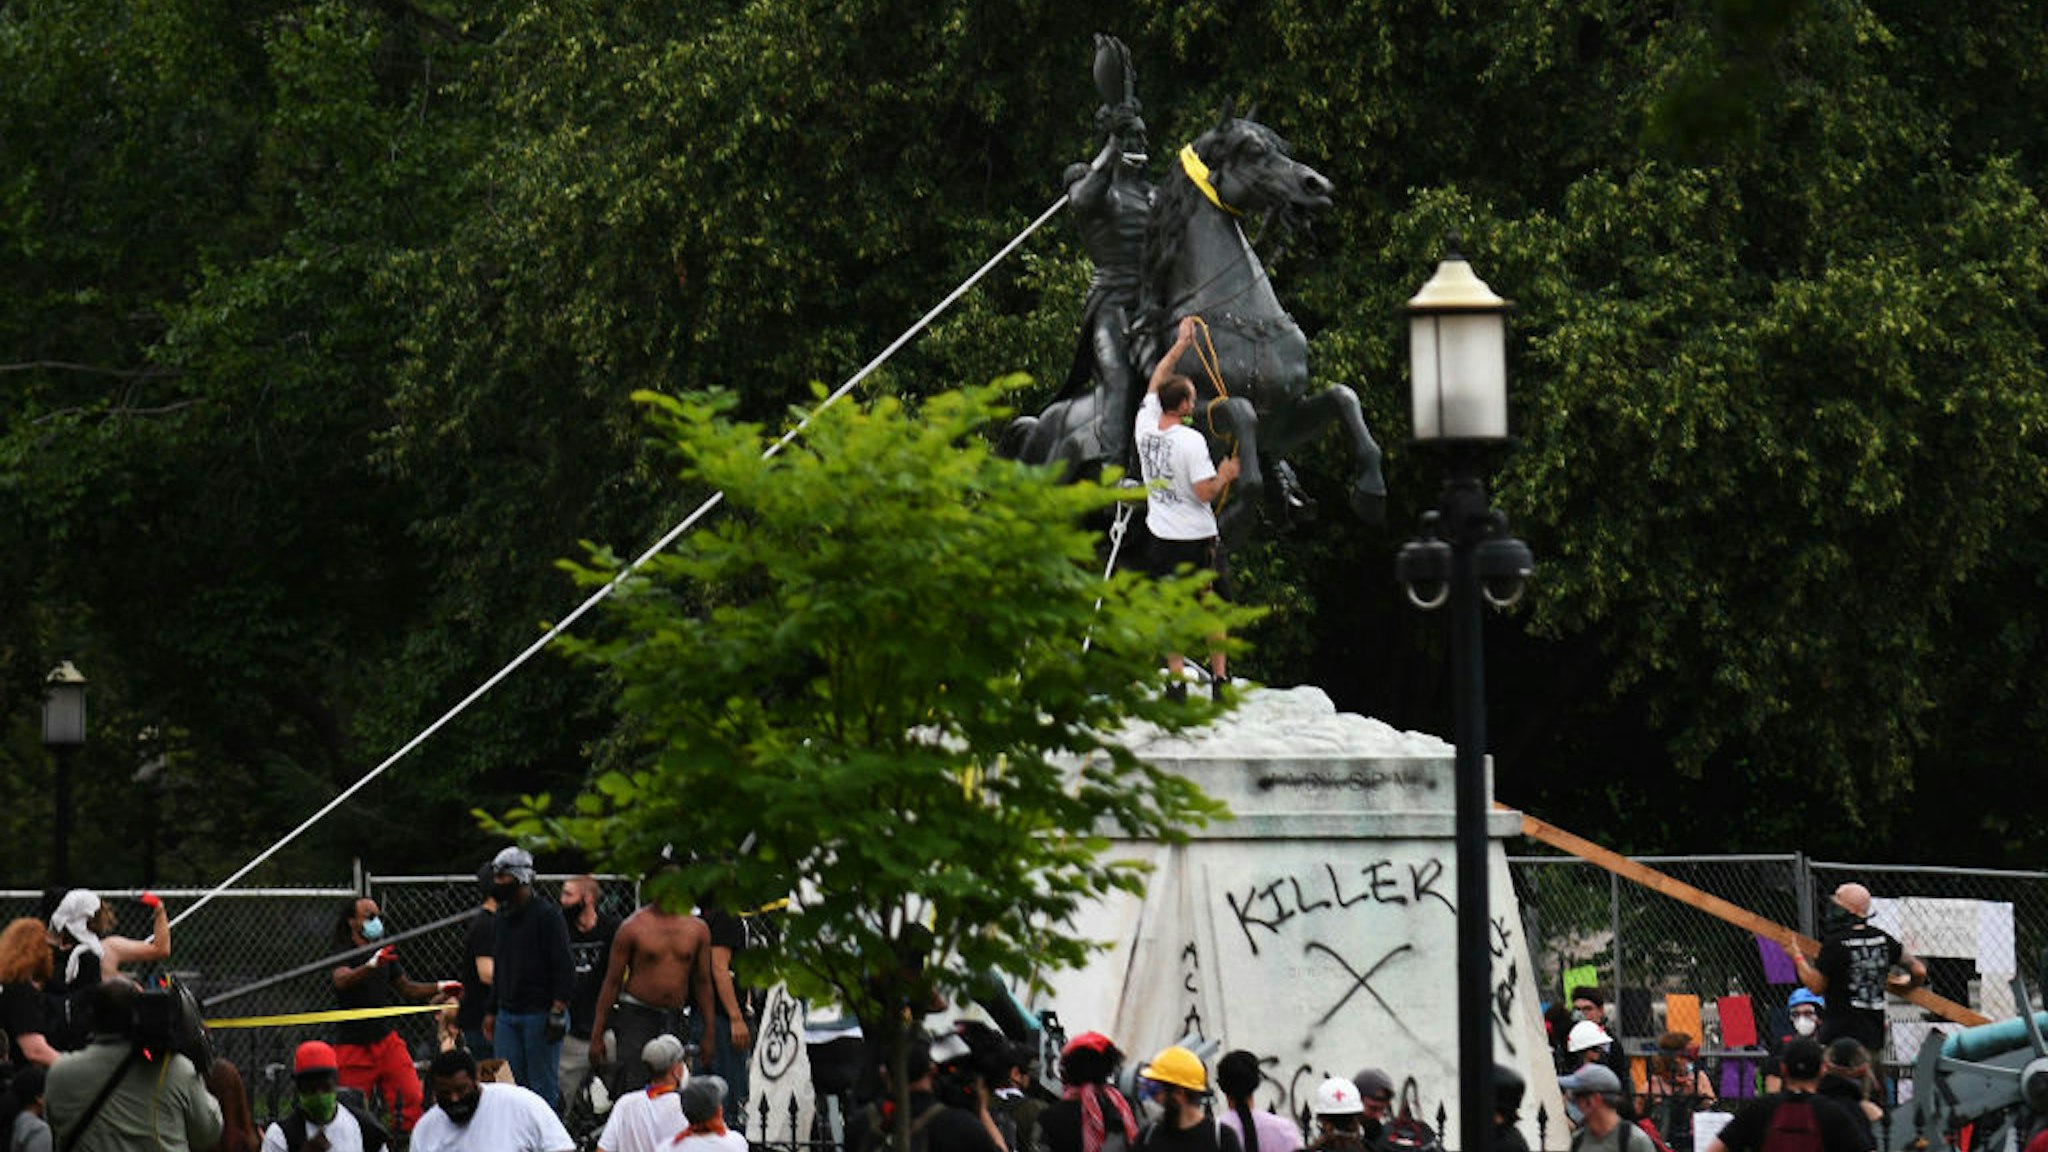 BLM protesters attempt to topple statue of Andrew Jackson near White House in Washington, D.C., June 22, 2020. (Photo by Astrid Riecken For The Washington Post via Getty Images)